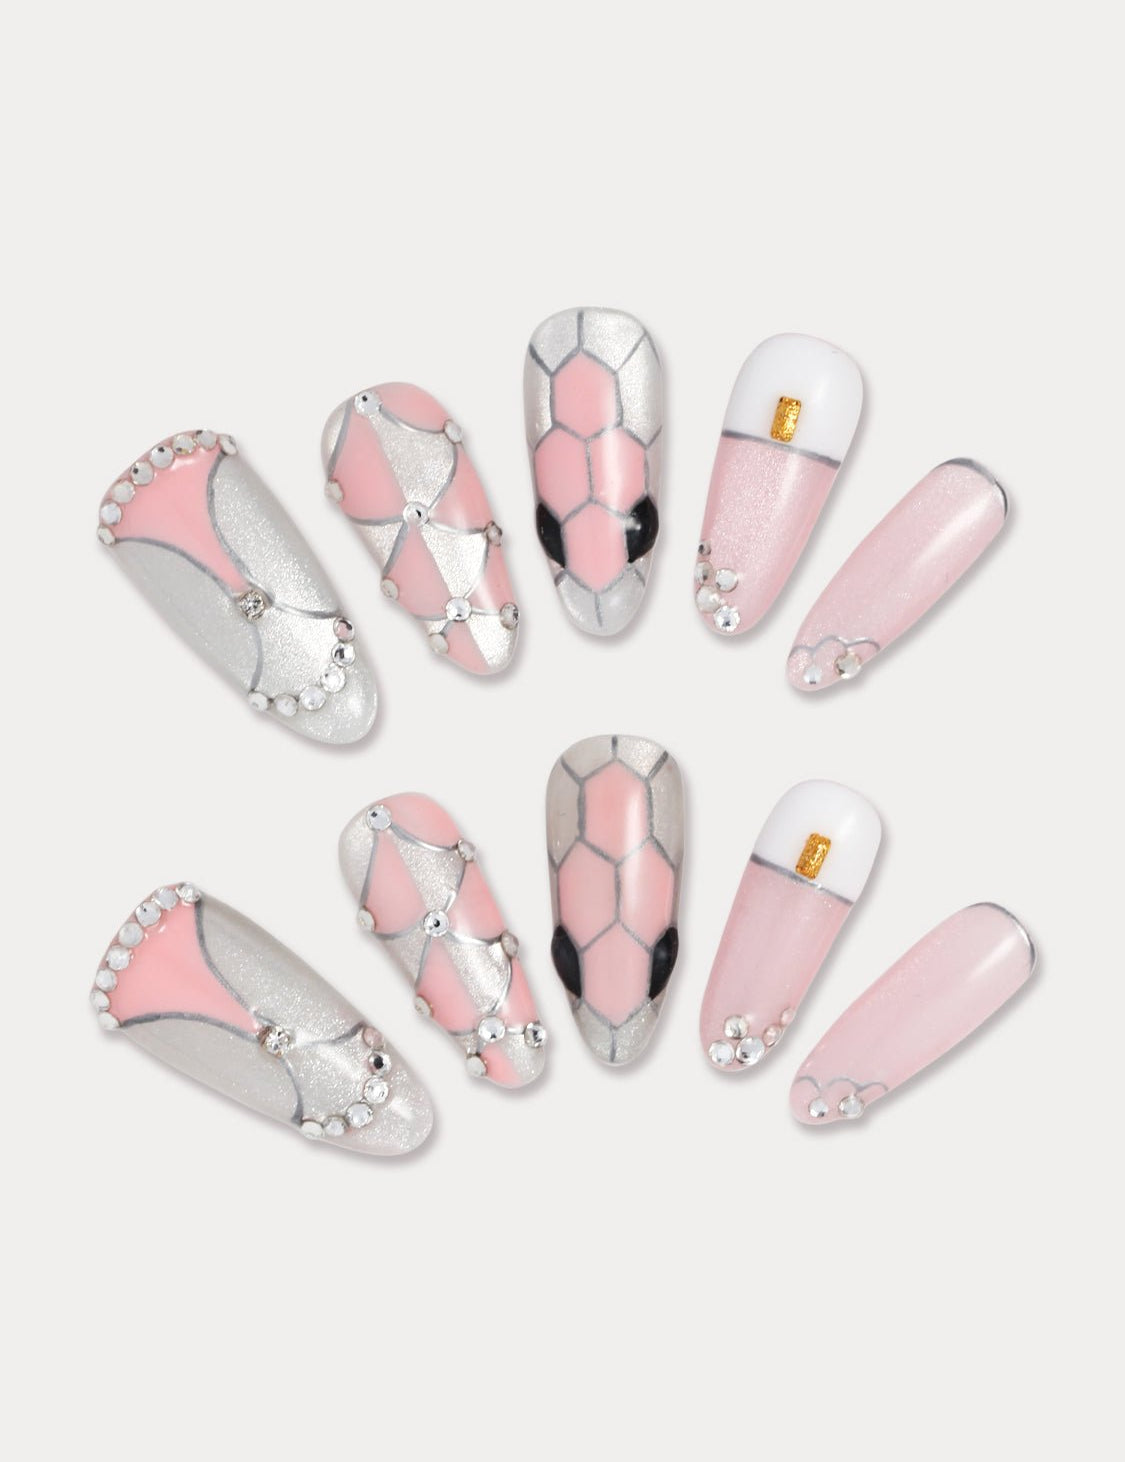 MIEAP Pink Snake Head press on nail set incorporates high-end jewelry design elements – snake head. The overall design of the nails features a palace vintage style, adding a sense of luxury to your nails. #MIEAP #MIEAPnails #pressonnail #falsenail #acrylicnail #nails #nailart #naildesign #nailinspo #handmadenail #summernail #nail2023 #graduationnail #luxurynail #pinknaial #datingnail #promnail